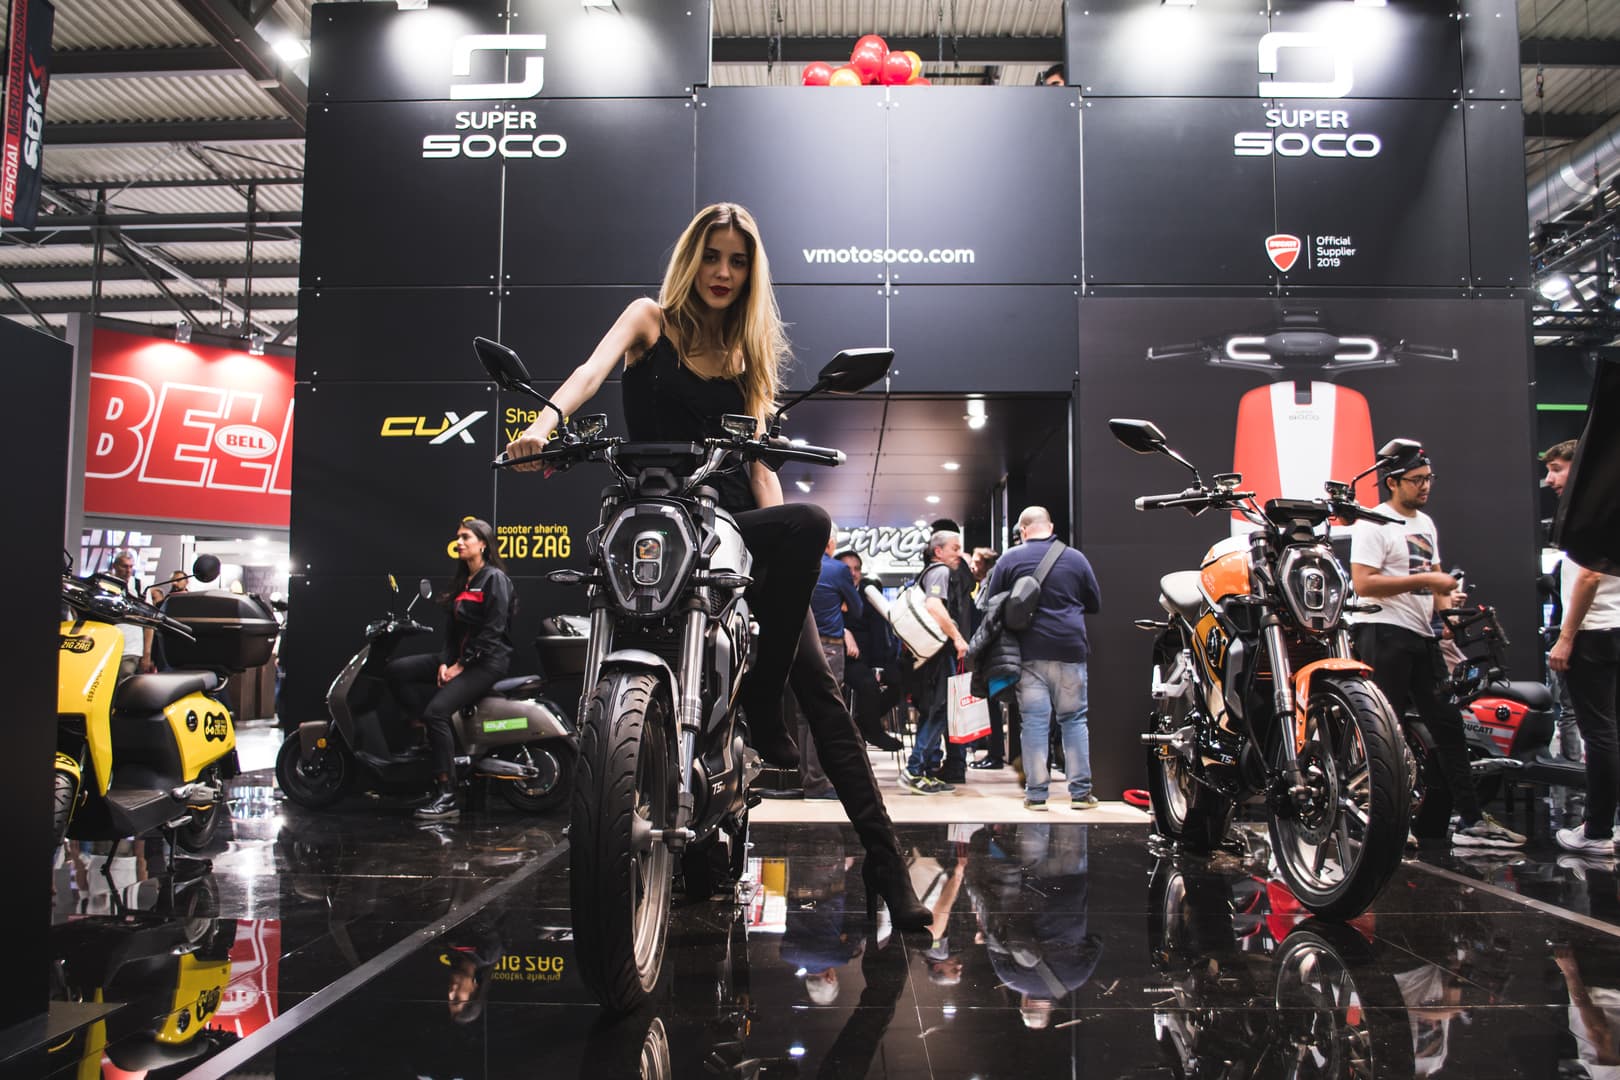 A view of SUPERSOCO's machines which were present at this year's EICMA, despite the fact that the brand didn't attend this year